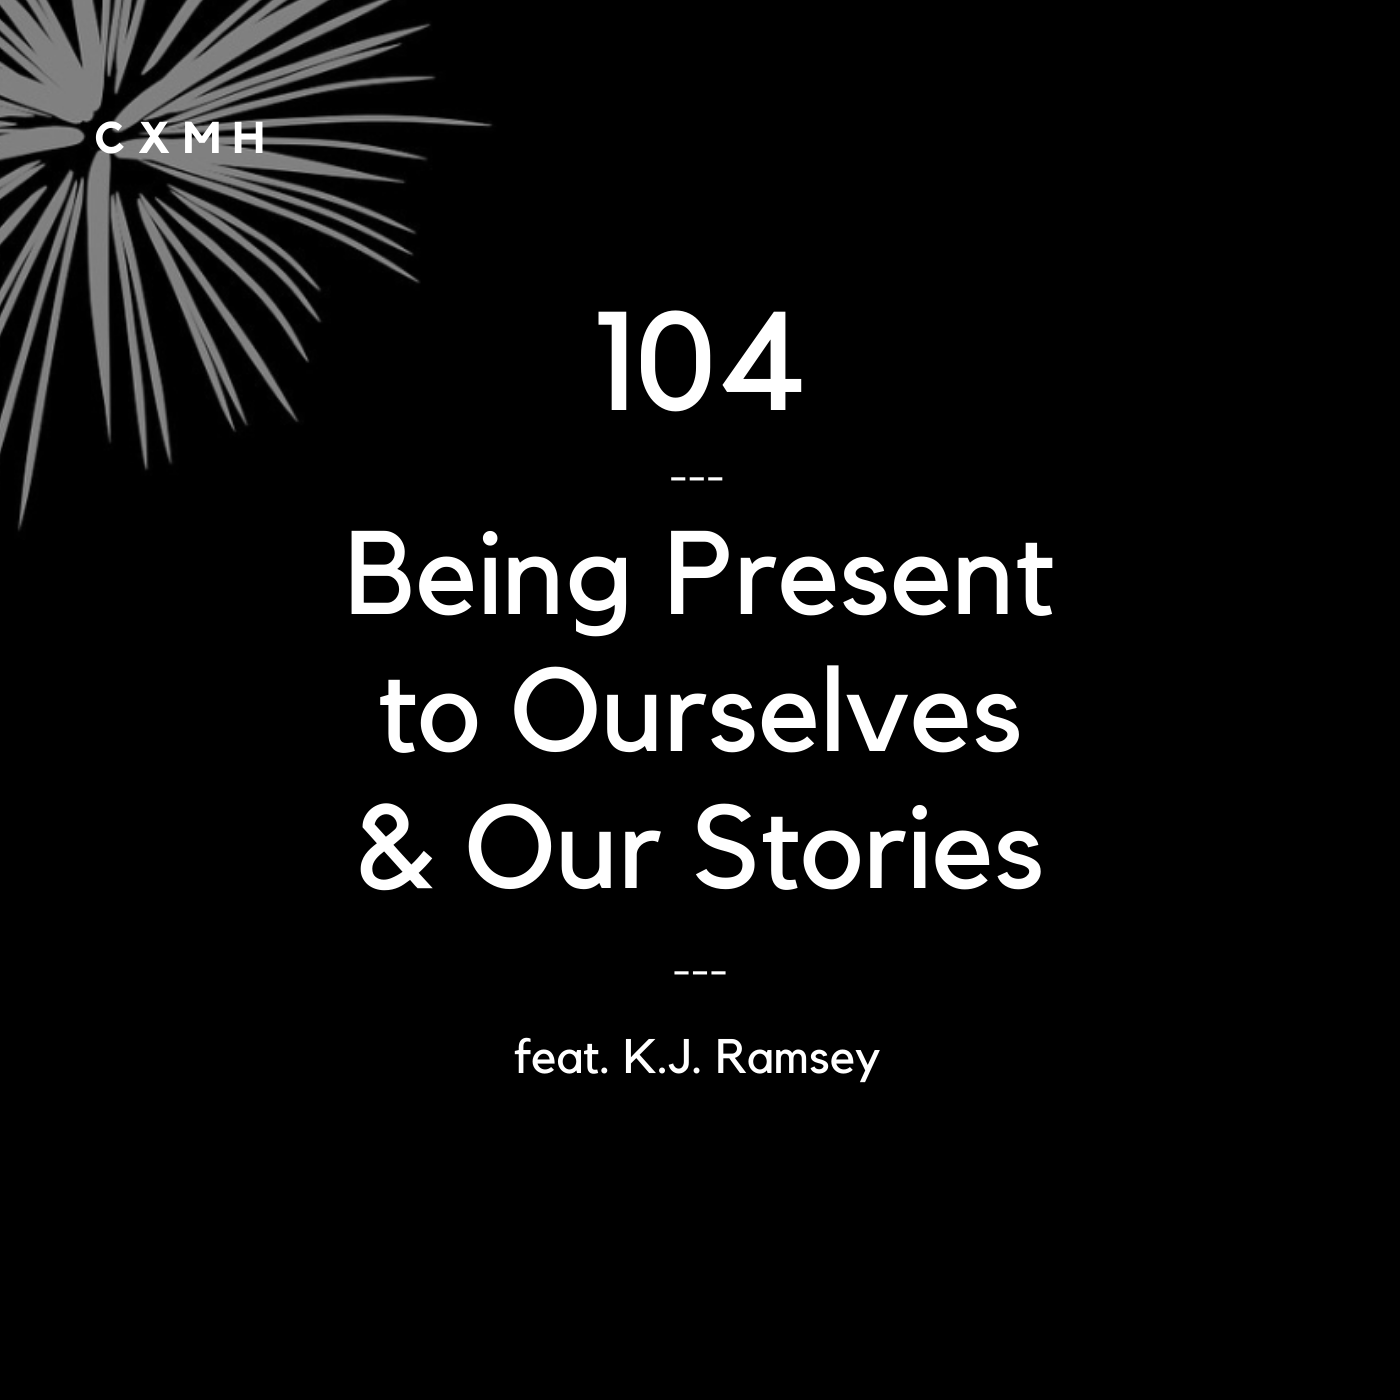 104 - Being Present to Ourselves & Our Stories (feat. K.J. Ramsey)